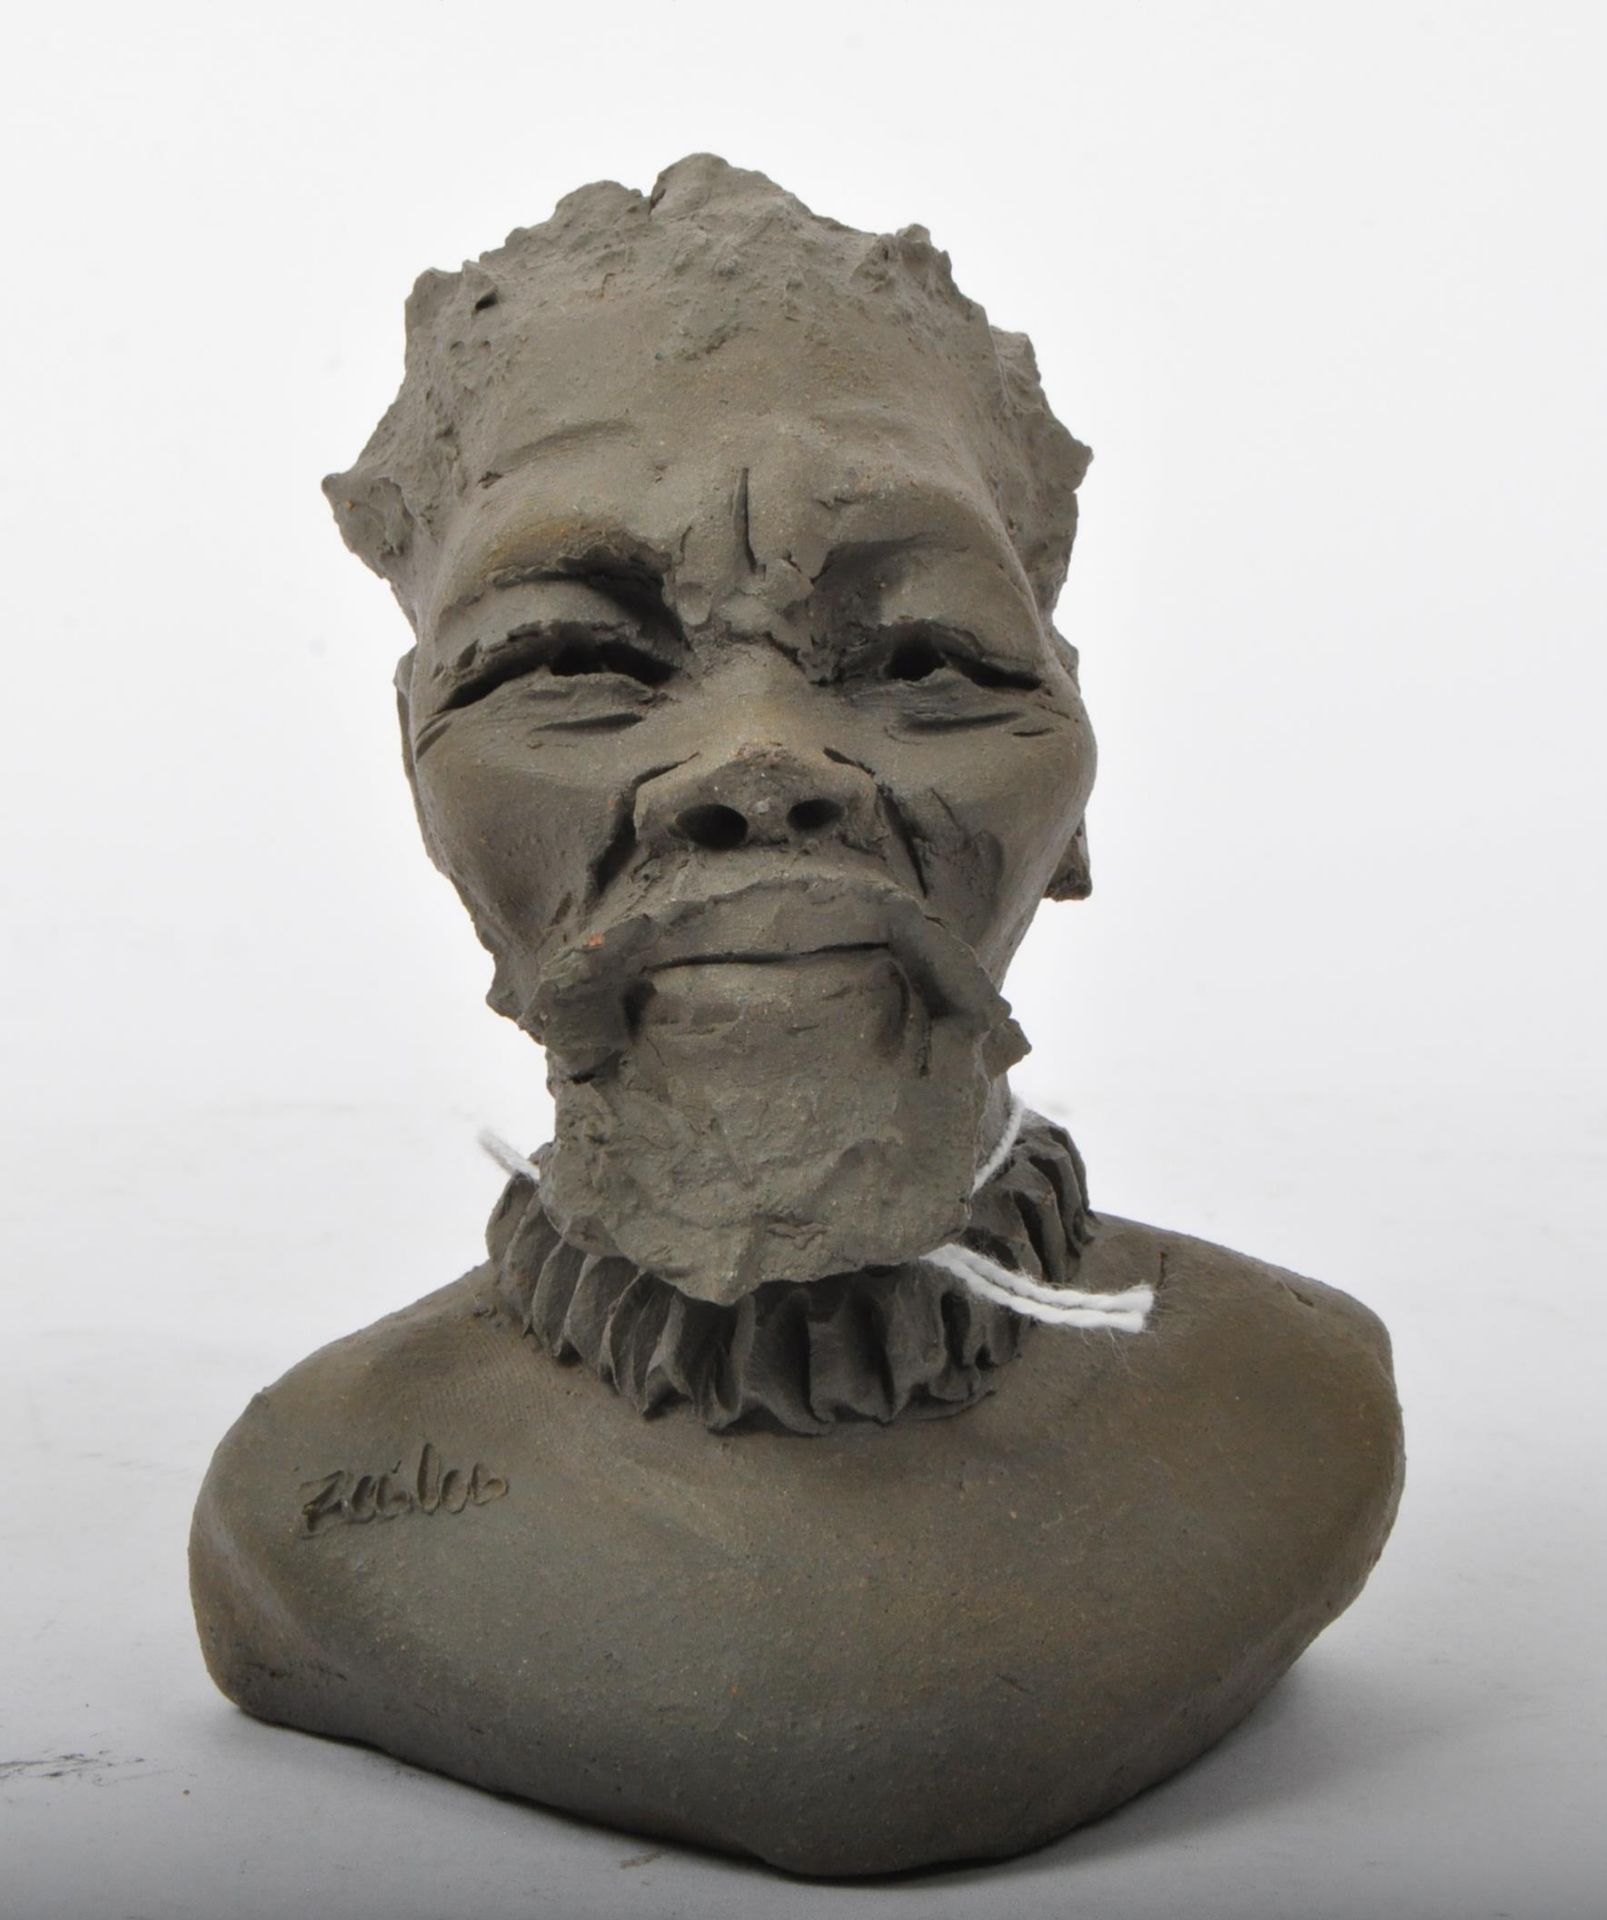 AN EARLY 20TH CENTURY CLAY POTTERY BUST OF A ZULU MAN